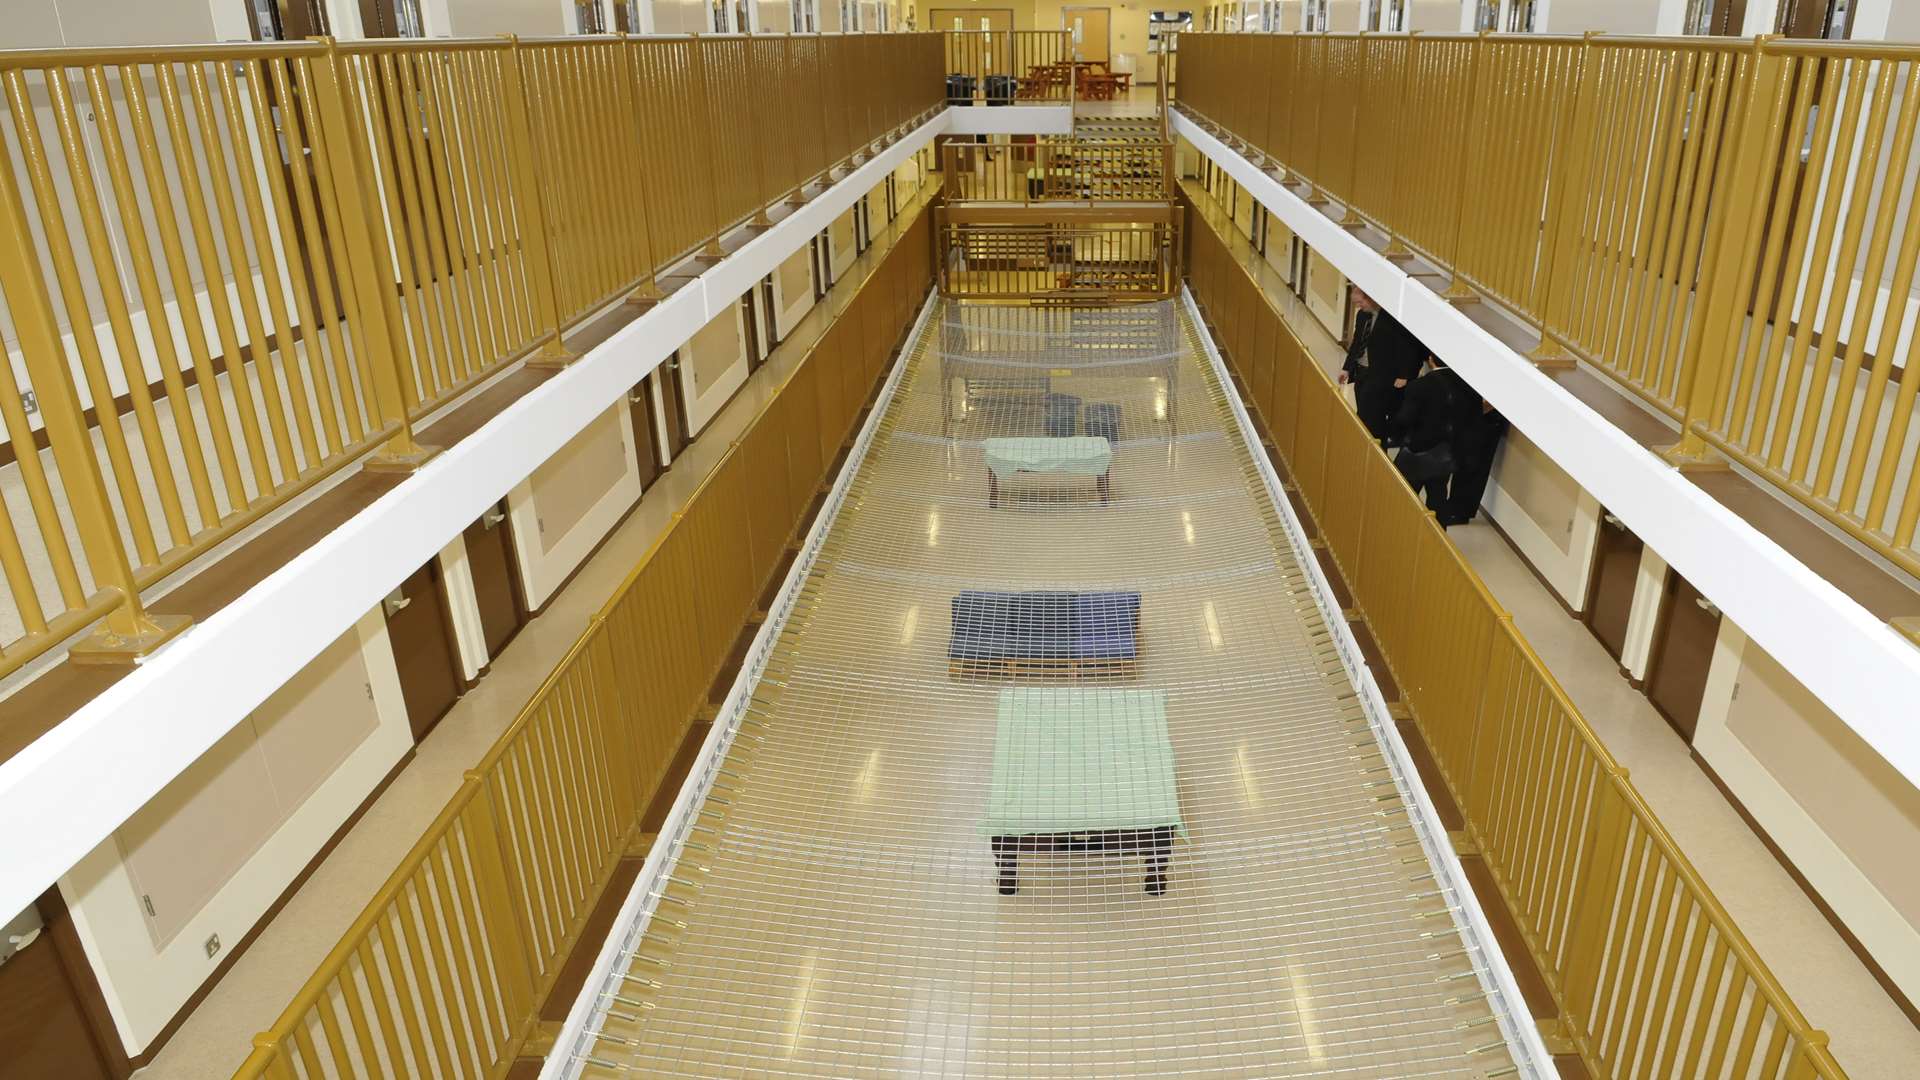 Trouble at HMP Swaleside has been blamed on understaffing